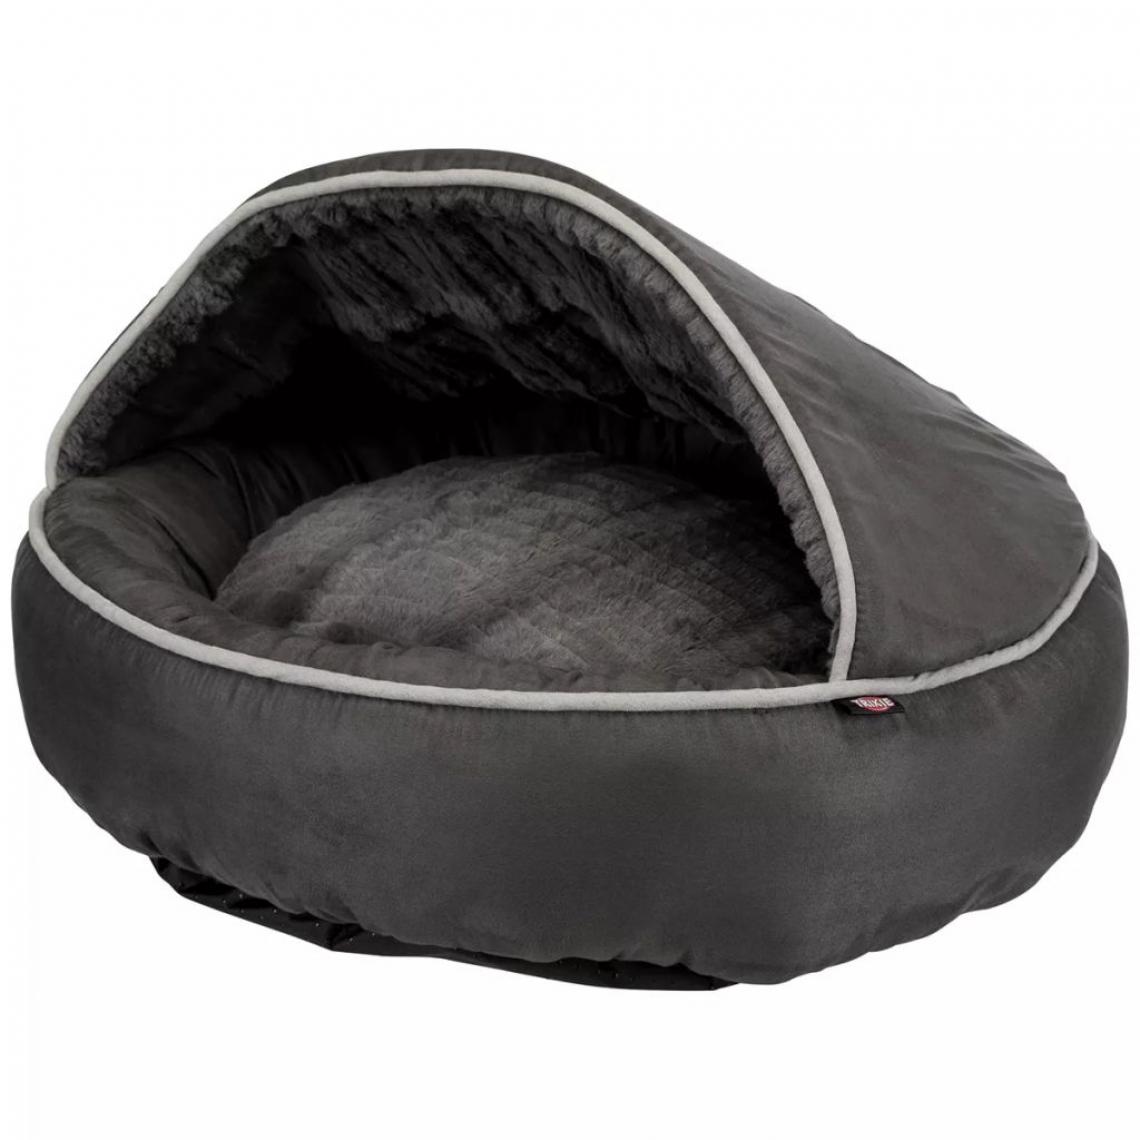 Trixie - TRIXIE Grotte pour chats Timber Anthracite 55 cm 37526 - Coussin pour chat